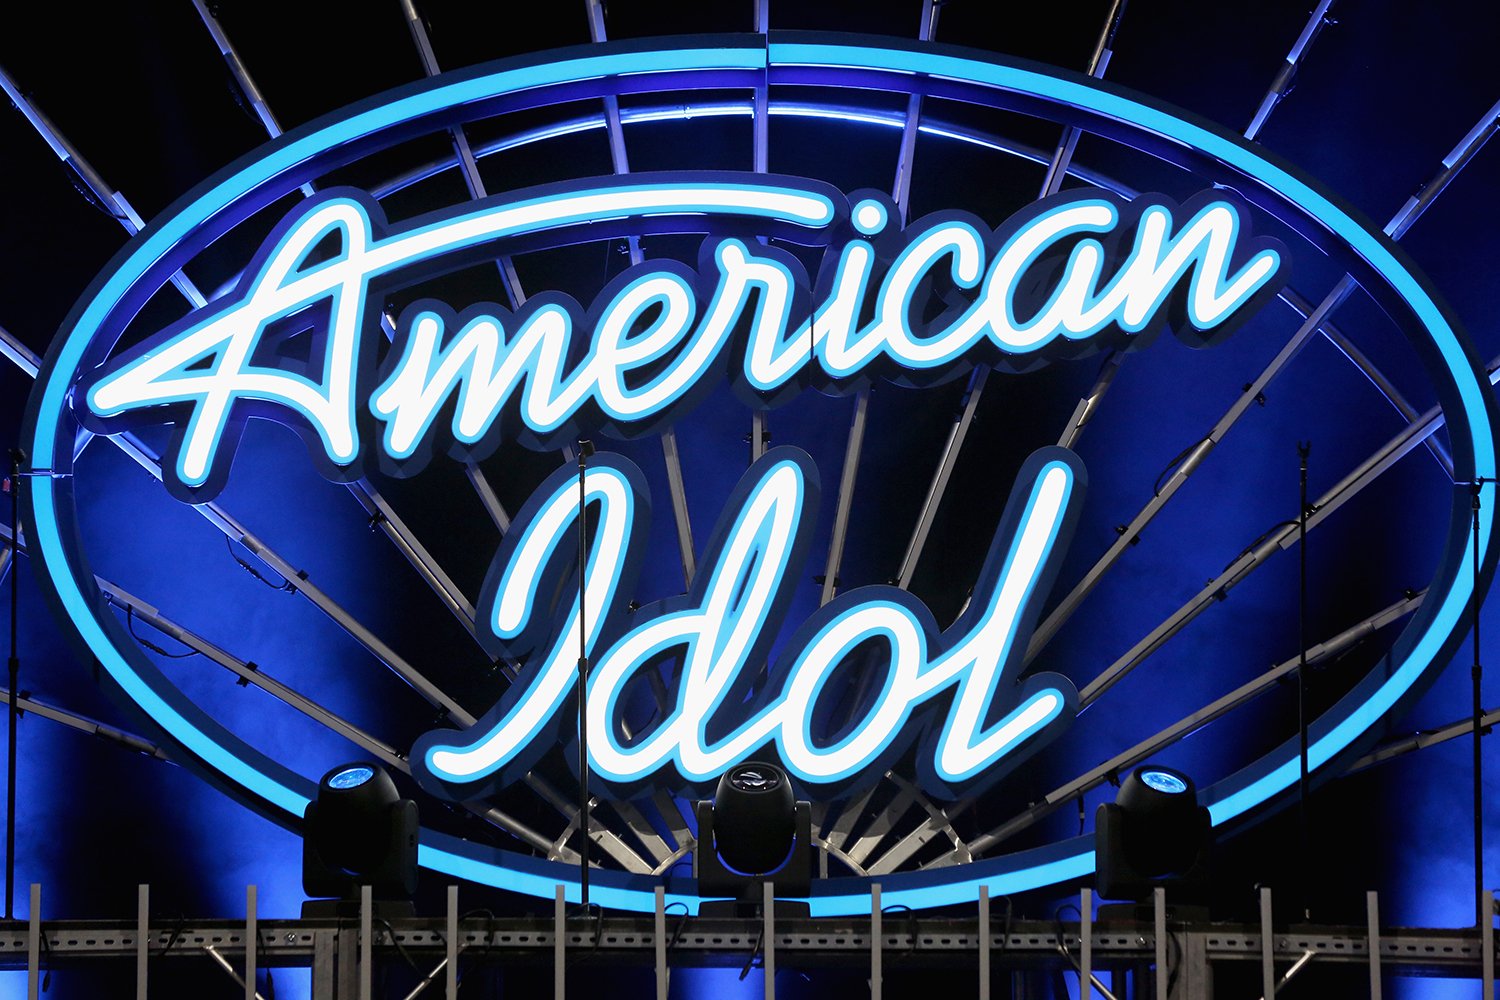 The American Idol logo, used to represent the show's funniest auditions